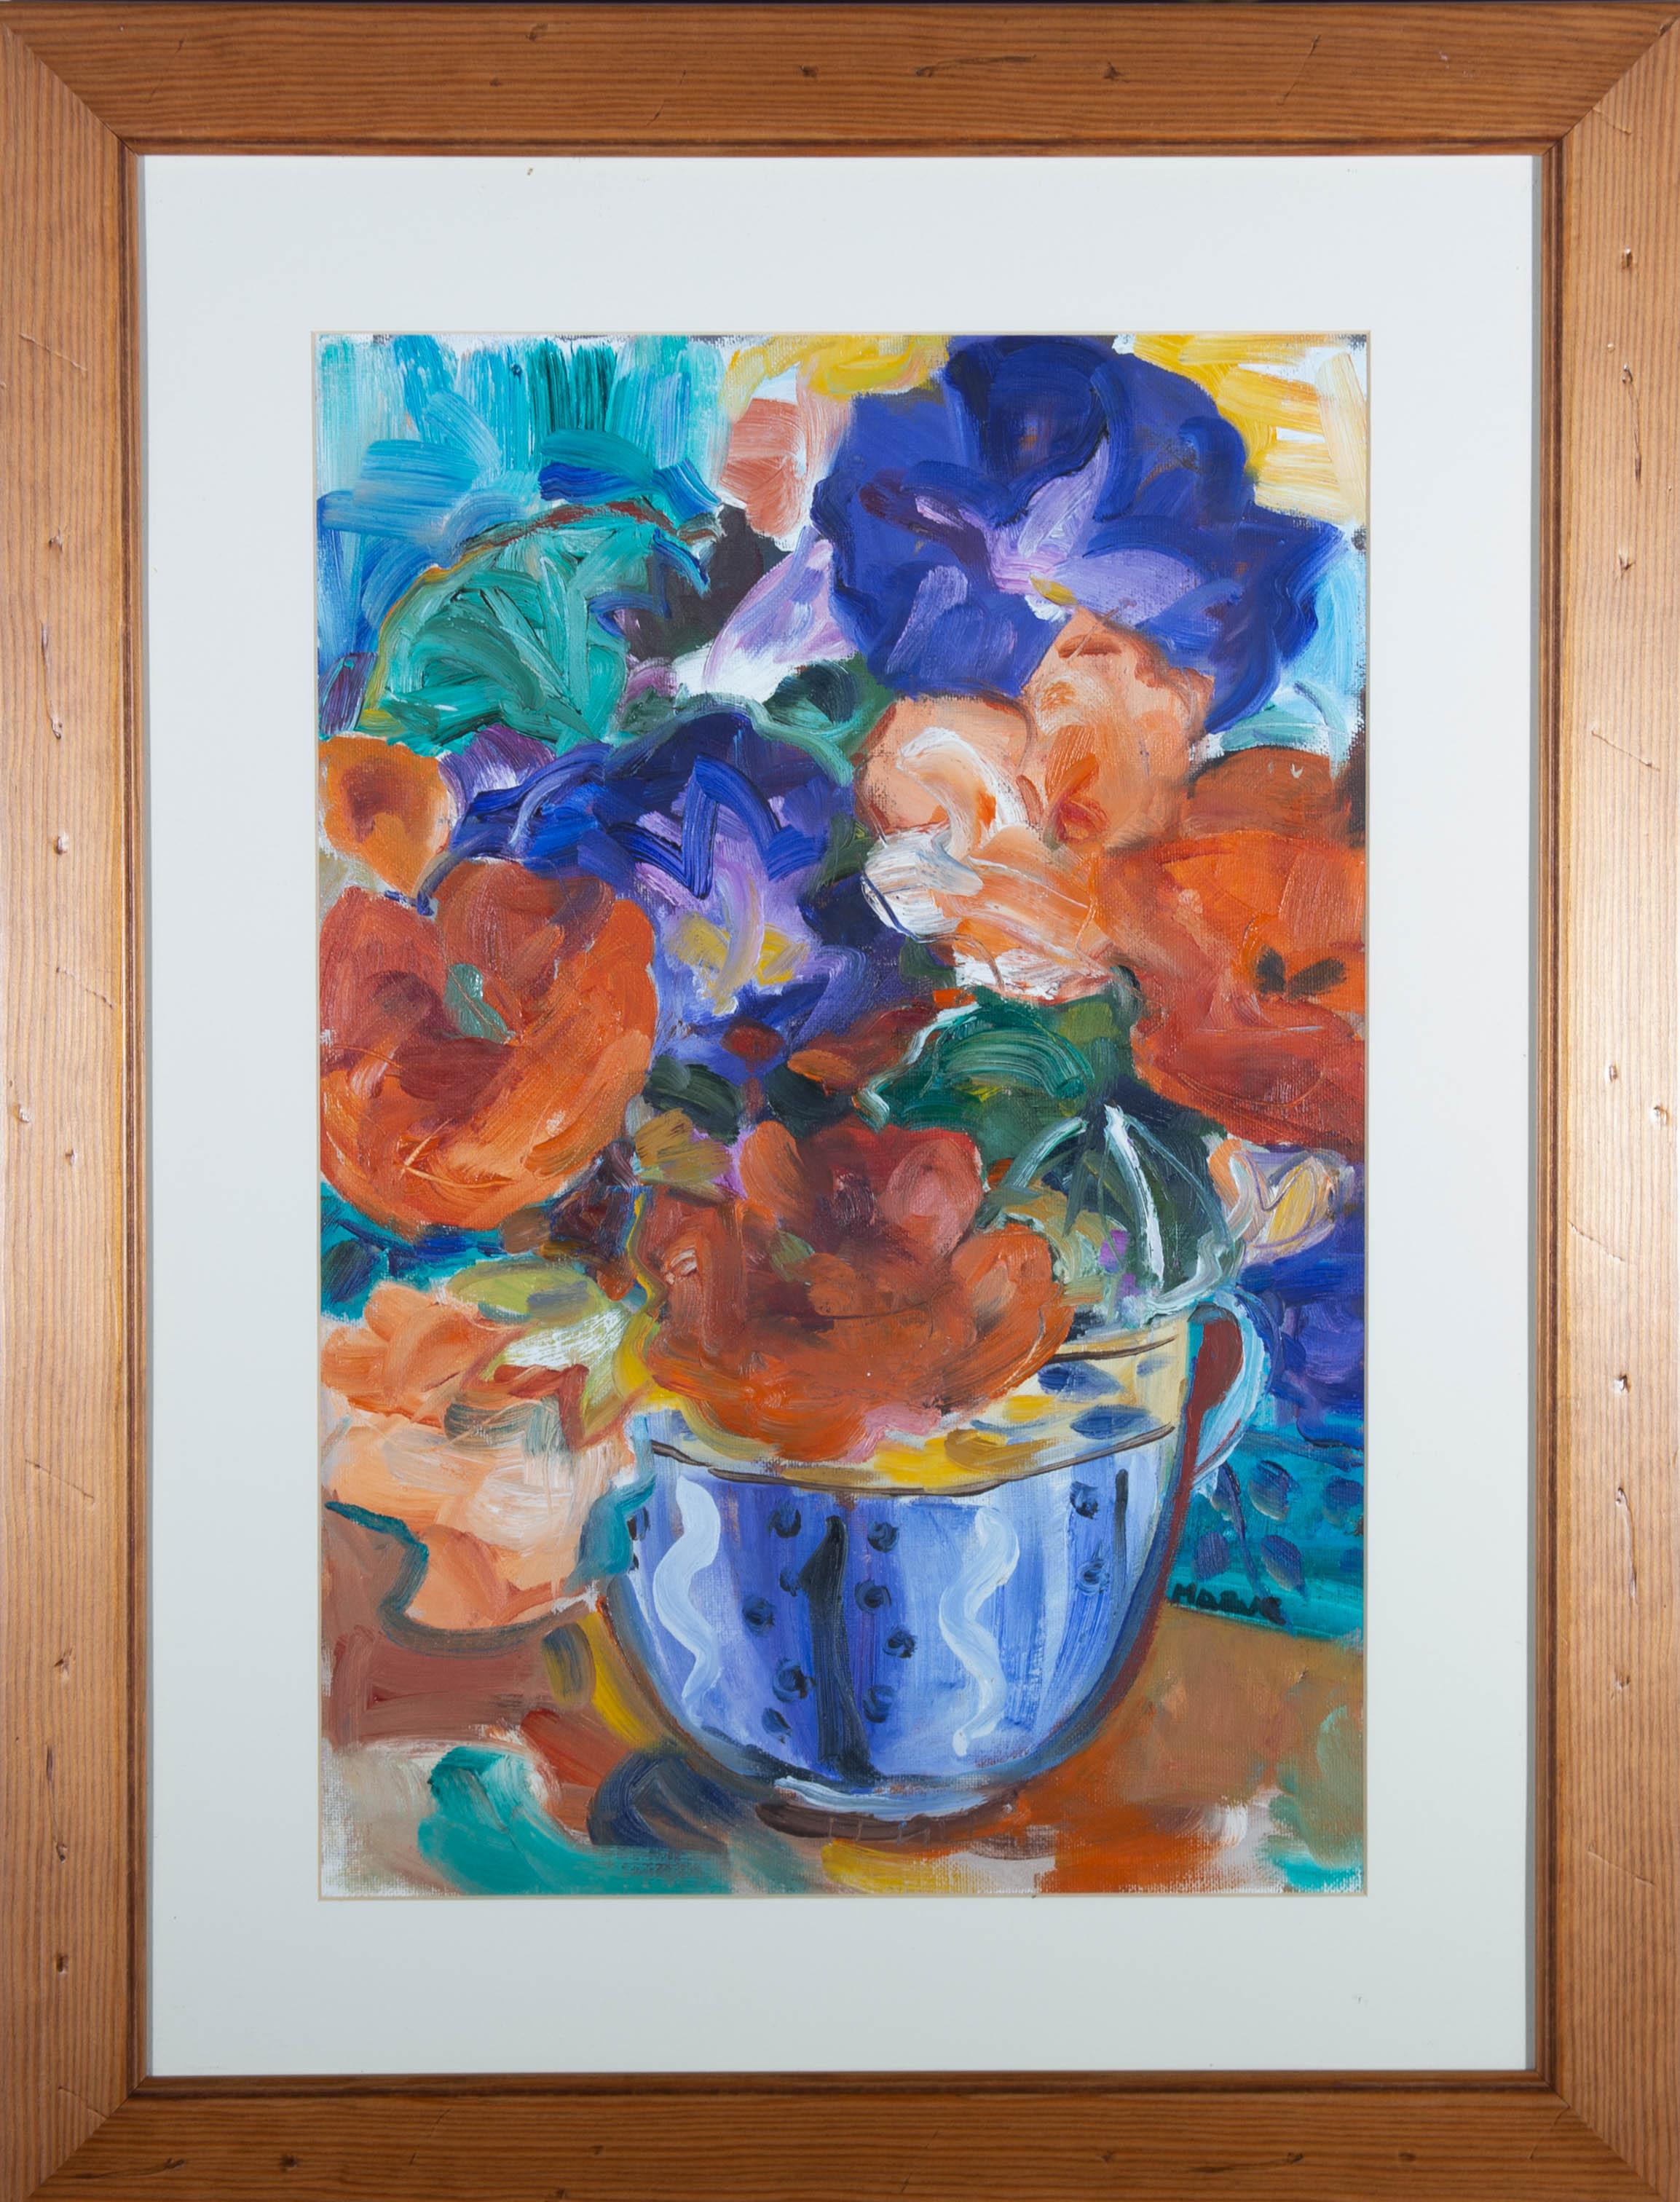 Unknown Still-Life Painting - 20th Century Oil - Vibrant Flowers in Blue and White Vase